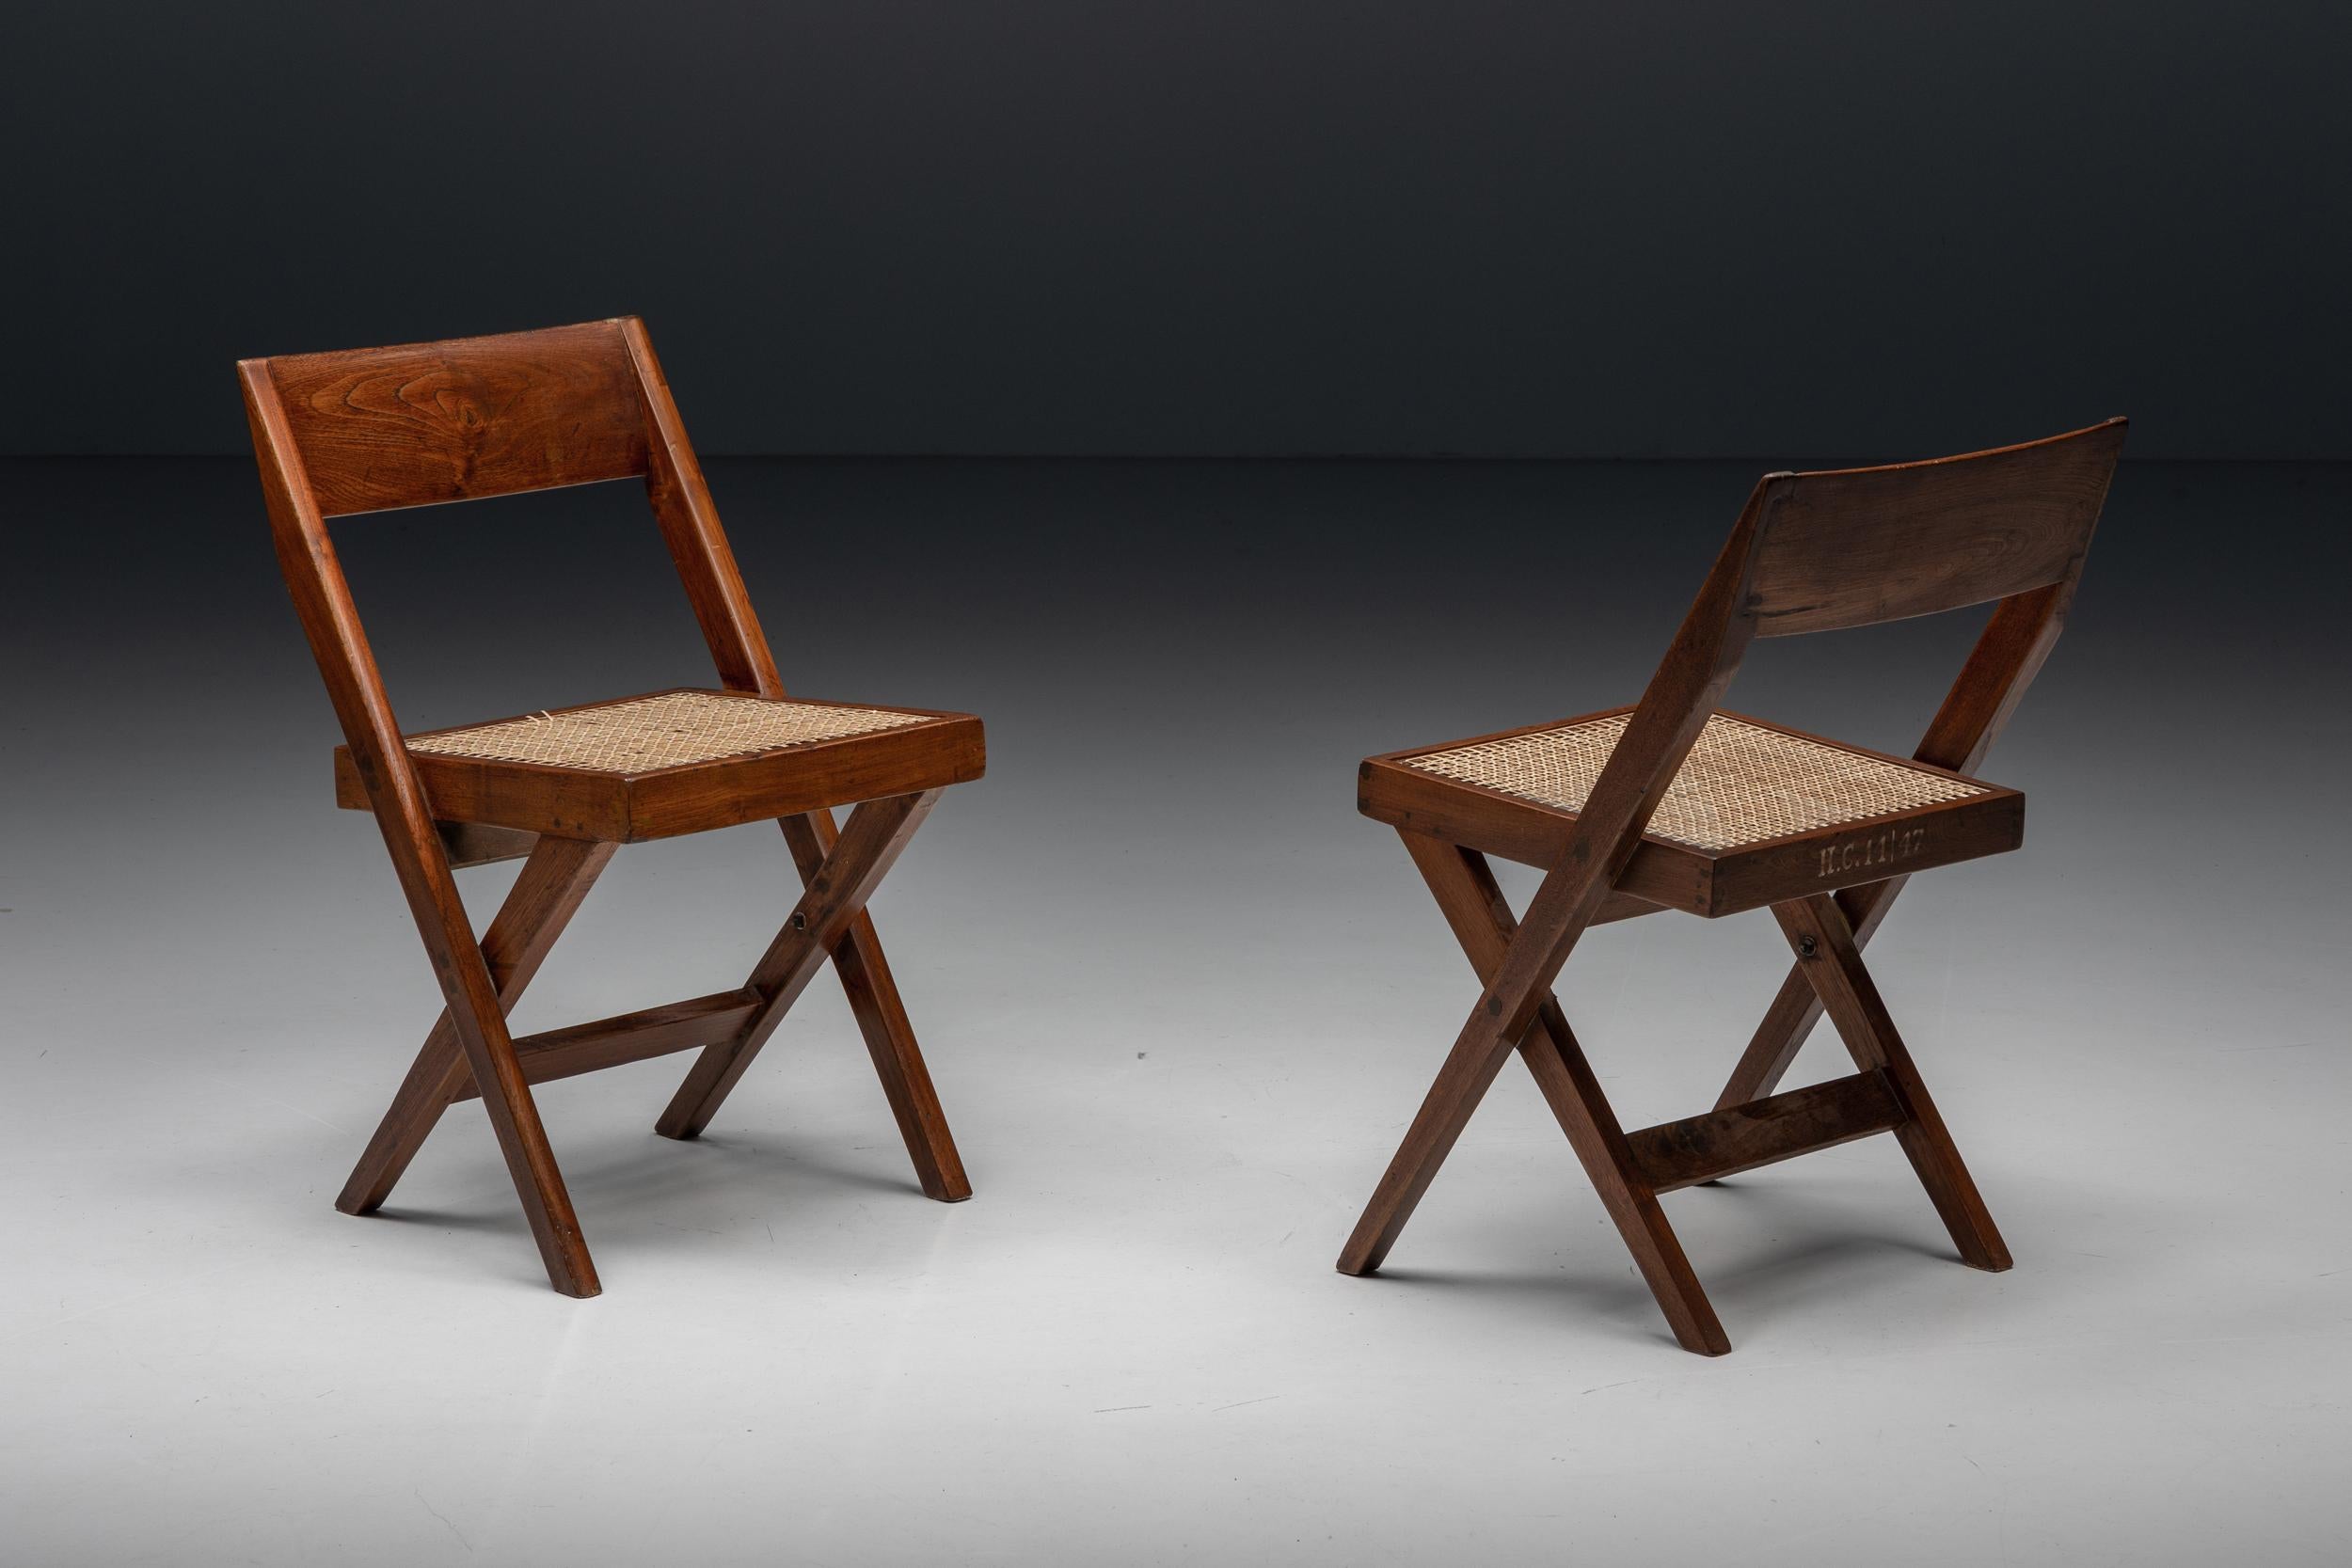 Teak Set of Library Chairs by Pierre Jeanneret, Chandigarh, 1950s For Sale